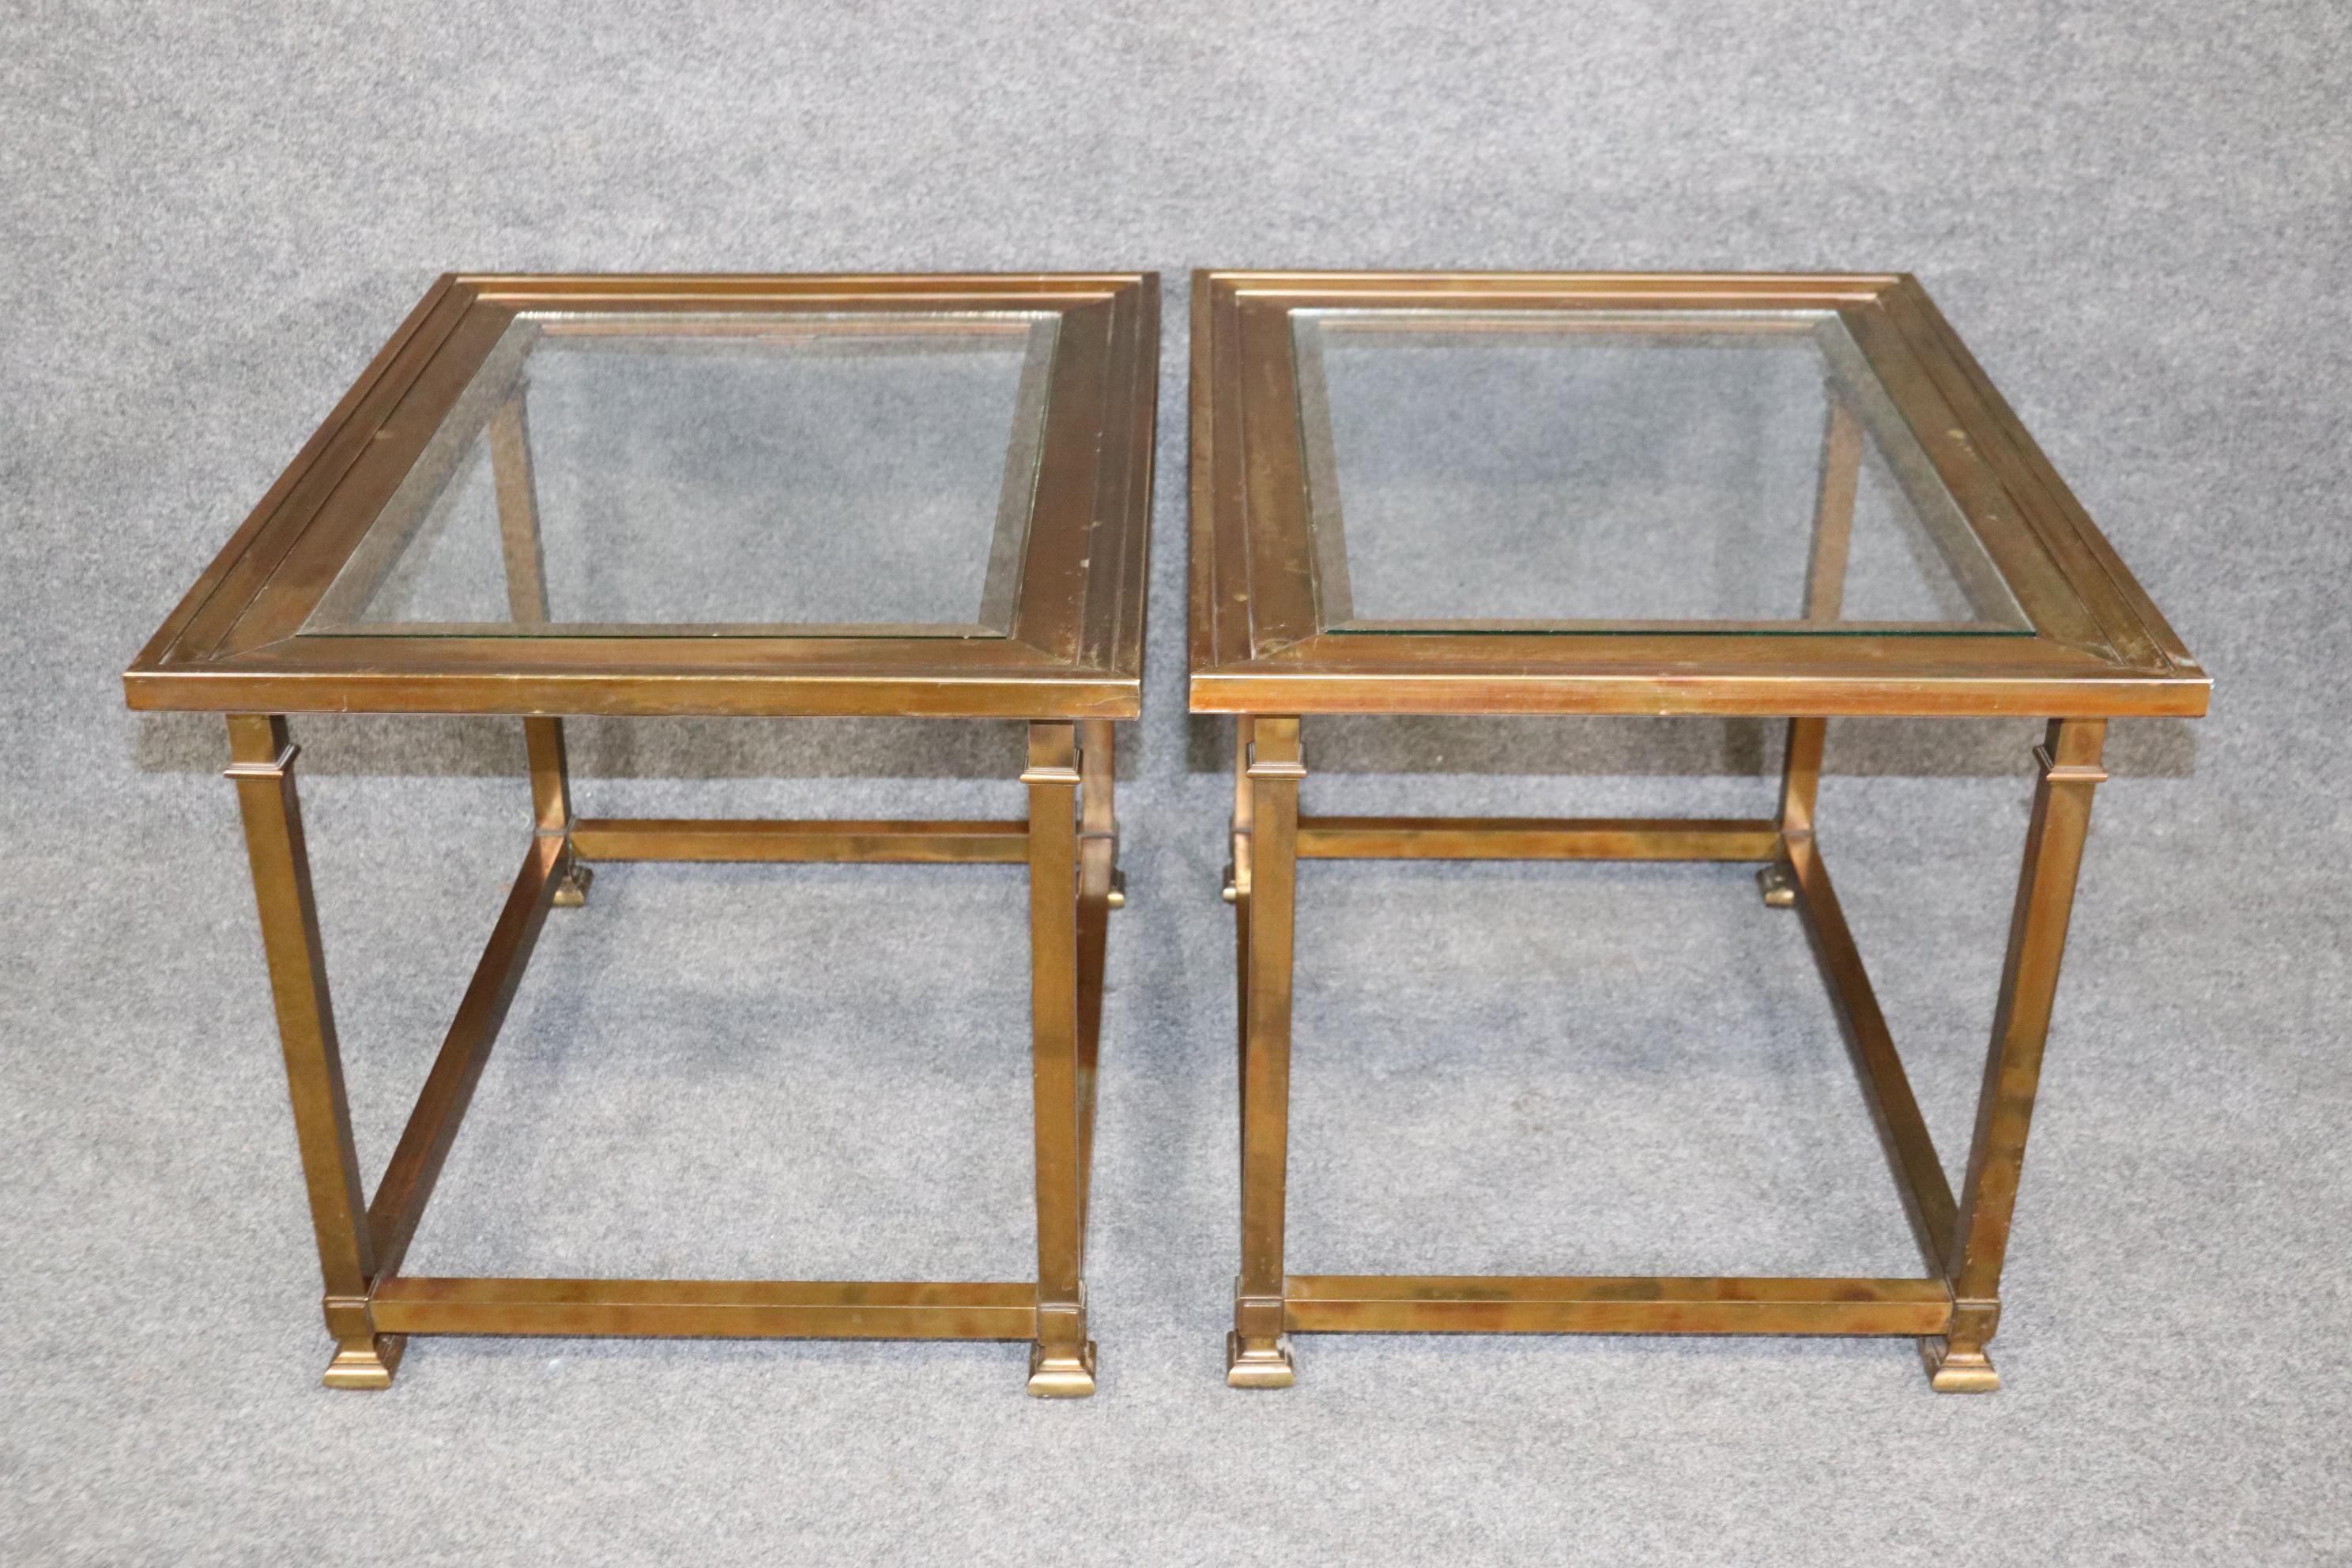 American Mid-Century Modern Pair of Brass Mastercraft Glass Top End Tables